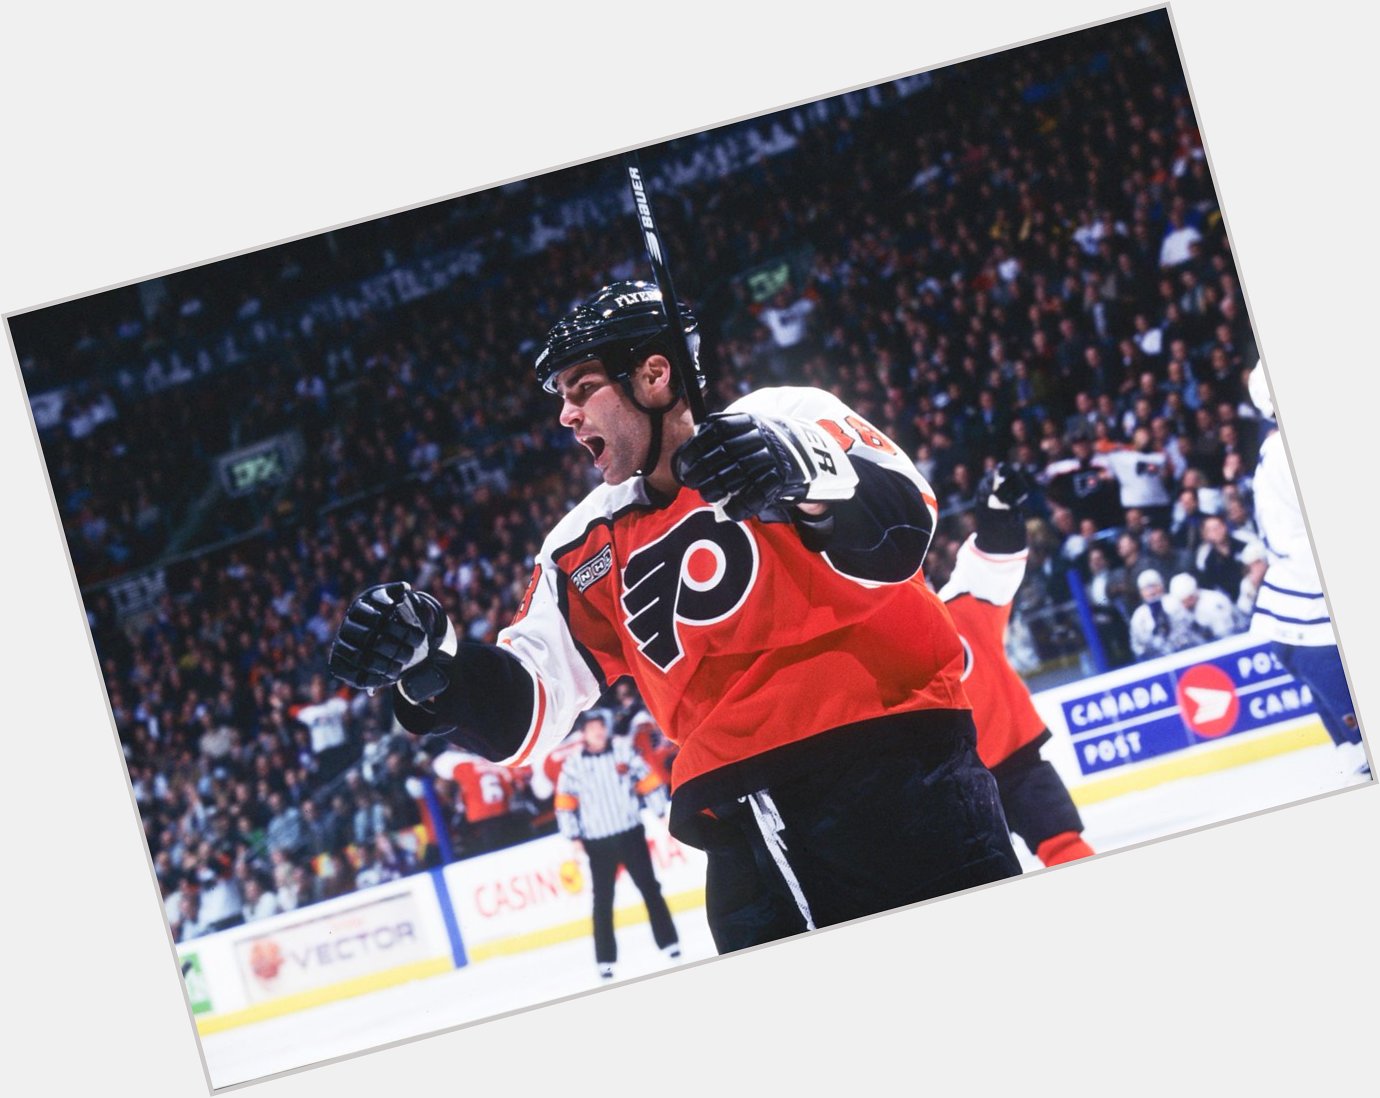 Happy Birthday goes out to Honoured Member Eric Lindros! 